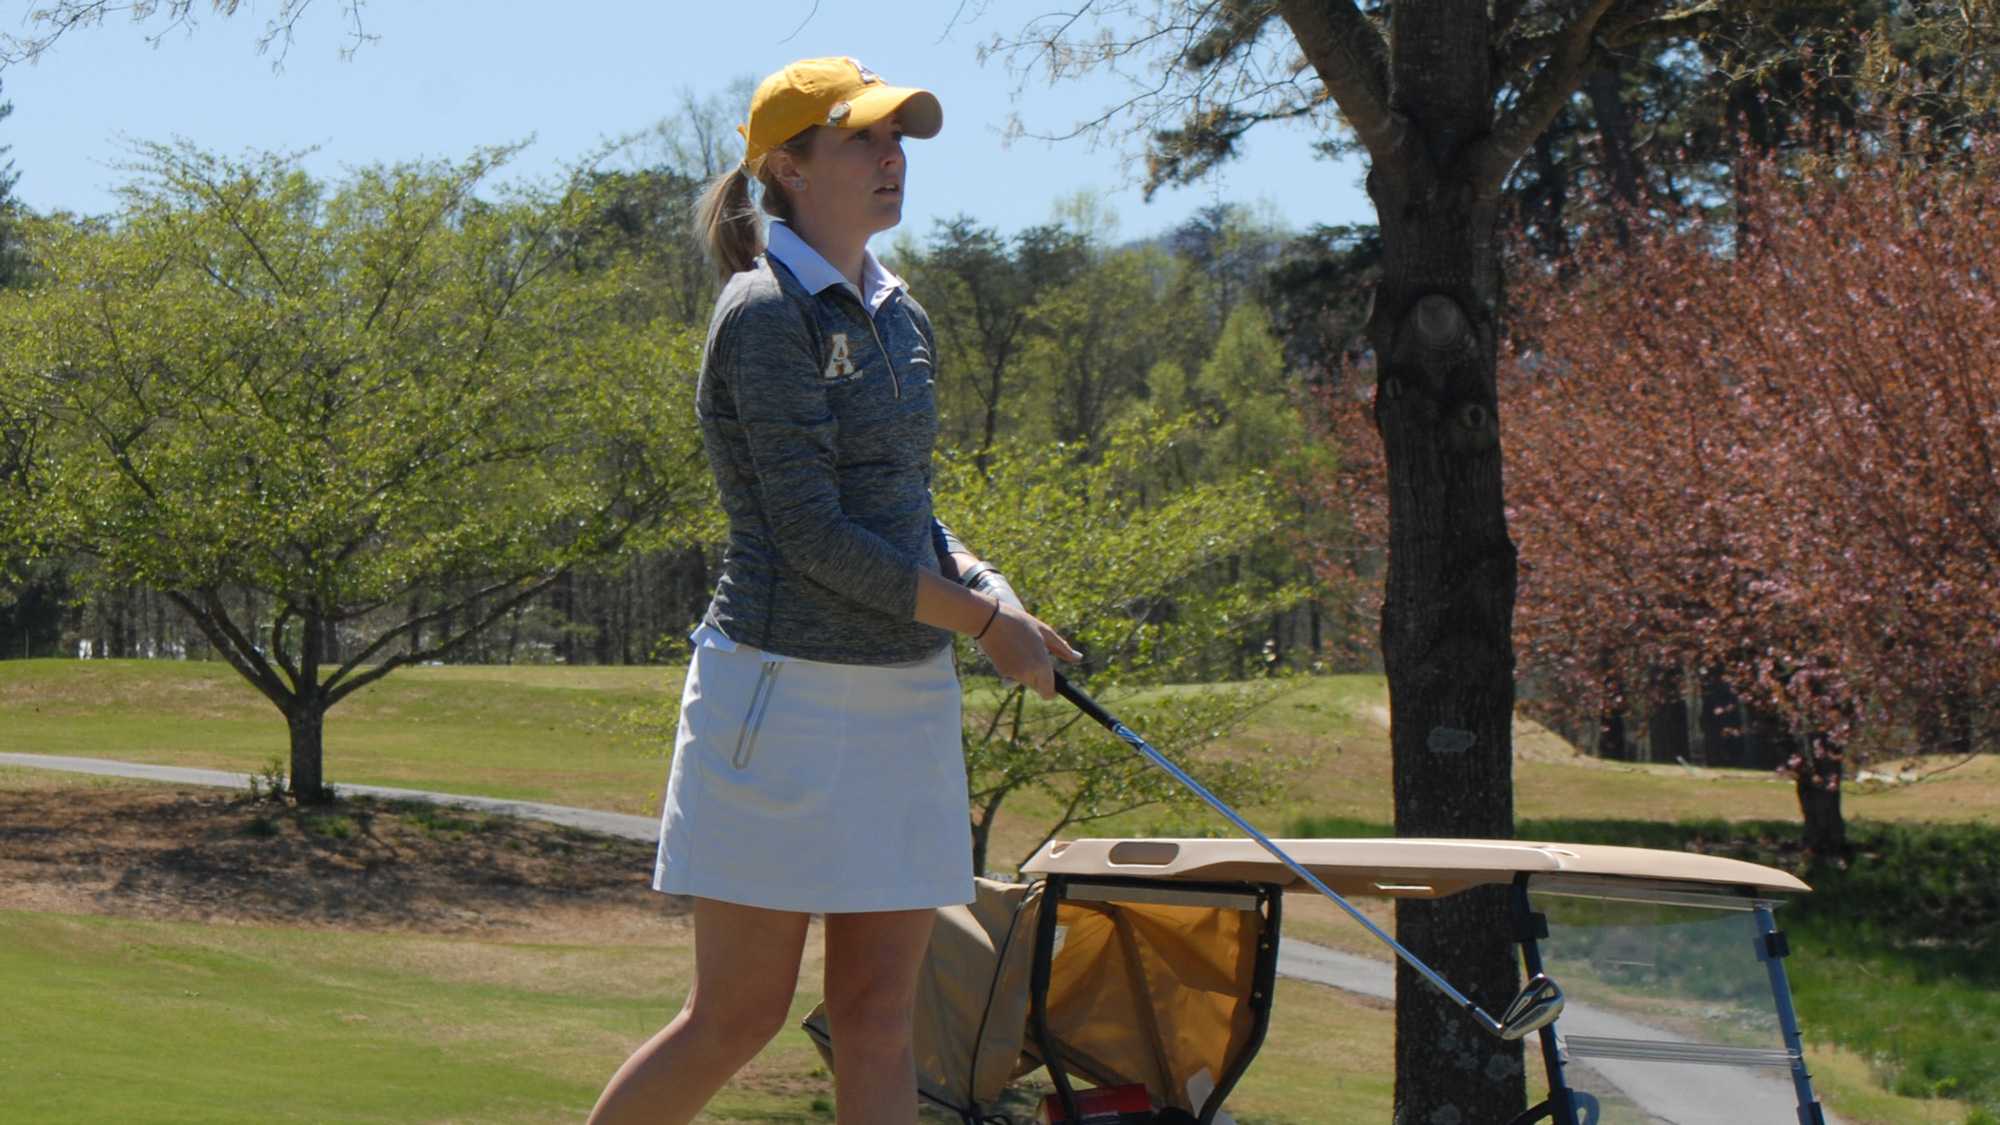 Stinson+watches+her+shot+during+tournament+play.+Photo+courtesy+App+State+Athletics.